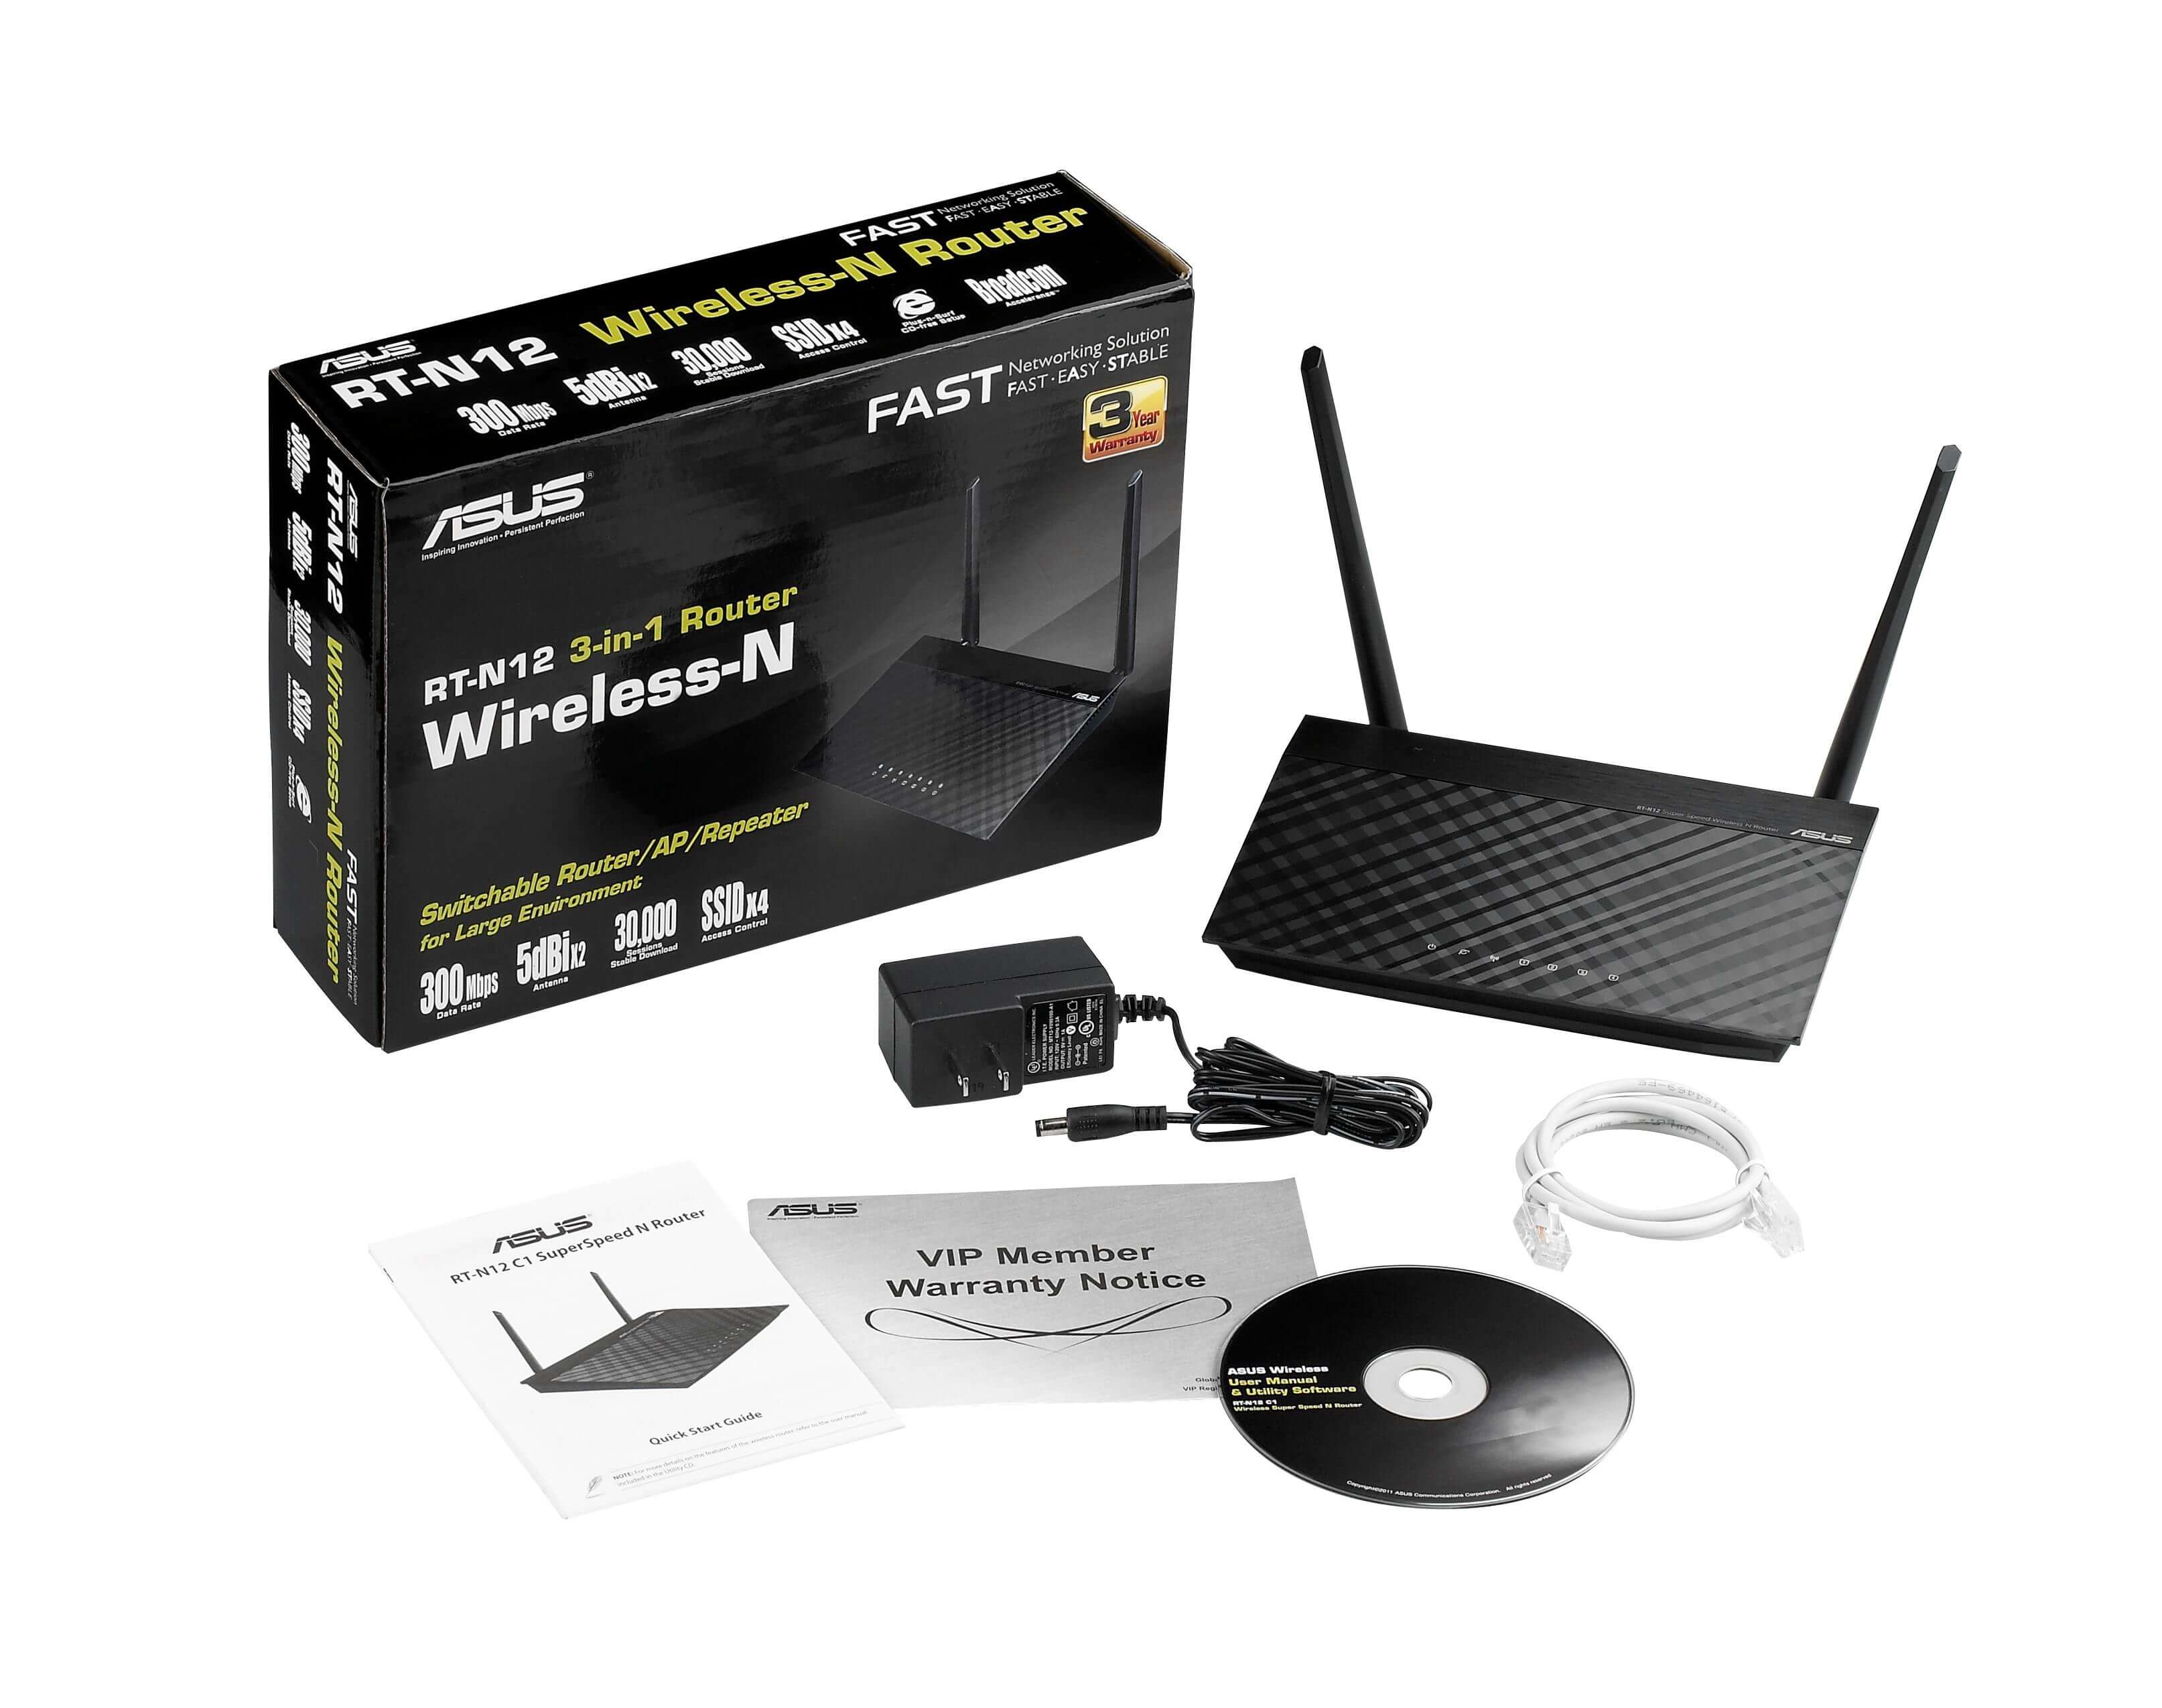 ASUS 3-In-1 Wireless Router